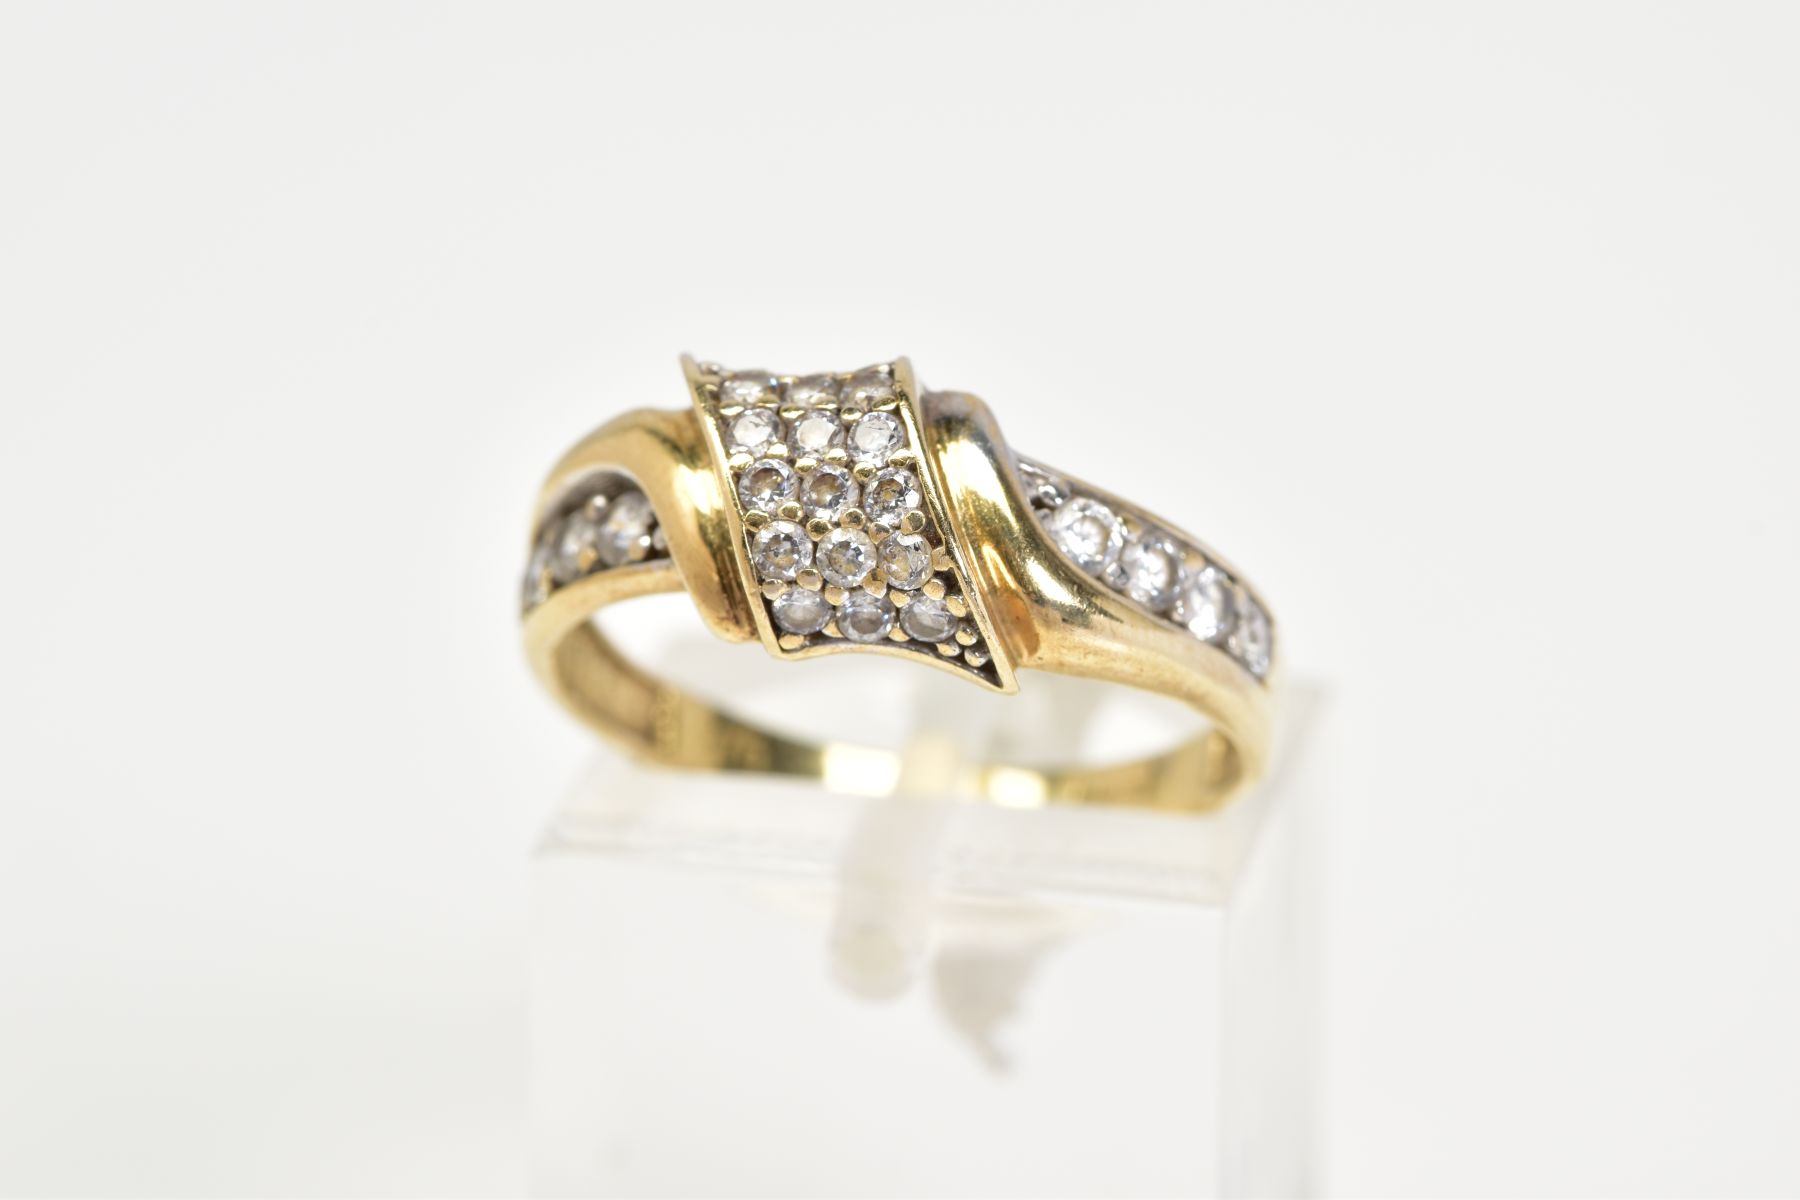 A 9CT GOLD DIAMOND RING, designed with an asymmetrical panel set with round brilliant cut